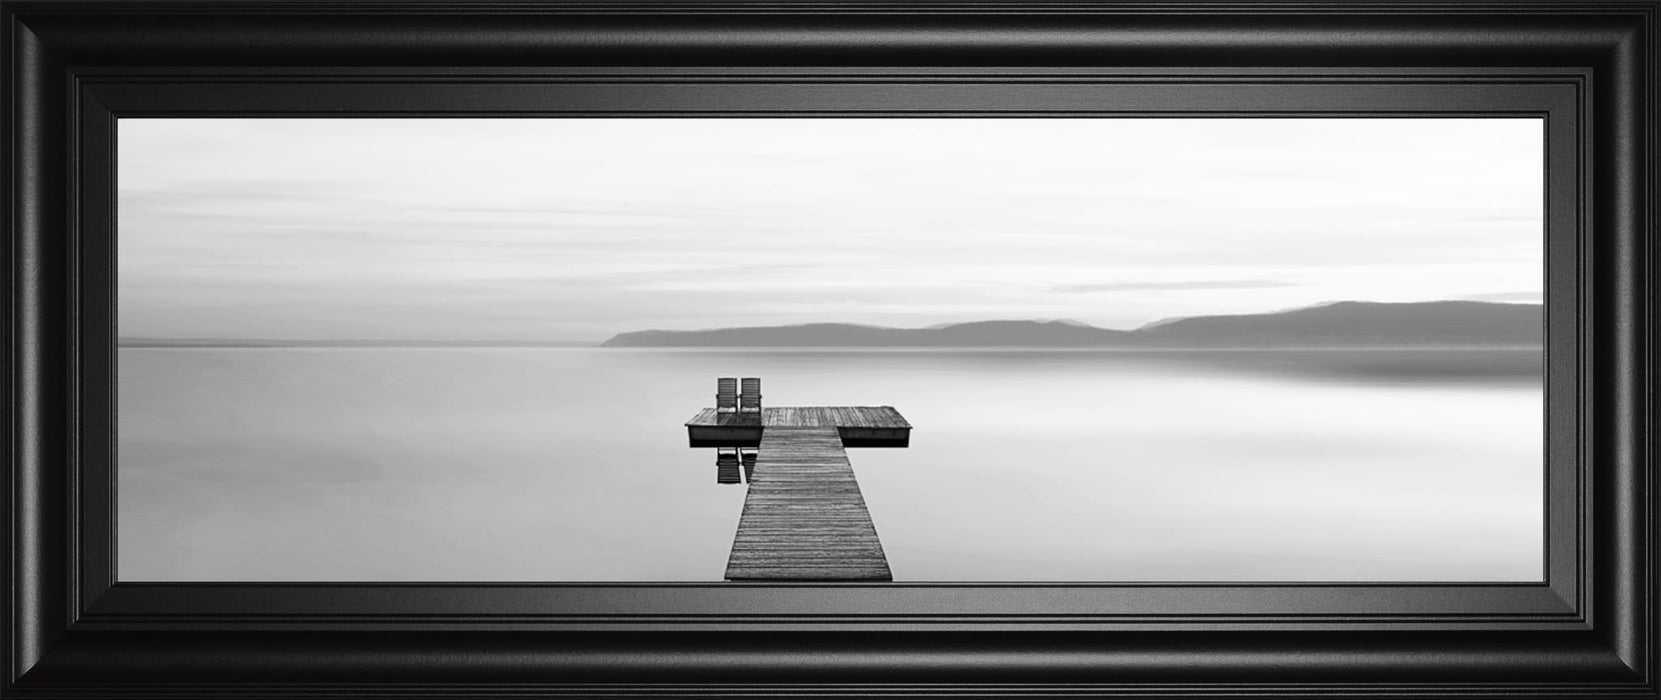 18x42 Black & White Water Panel XII By James McLoughlin - Dark Gray